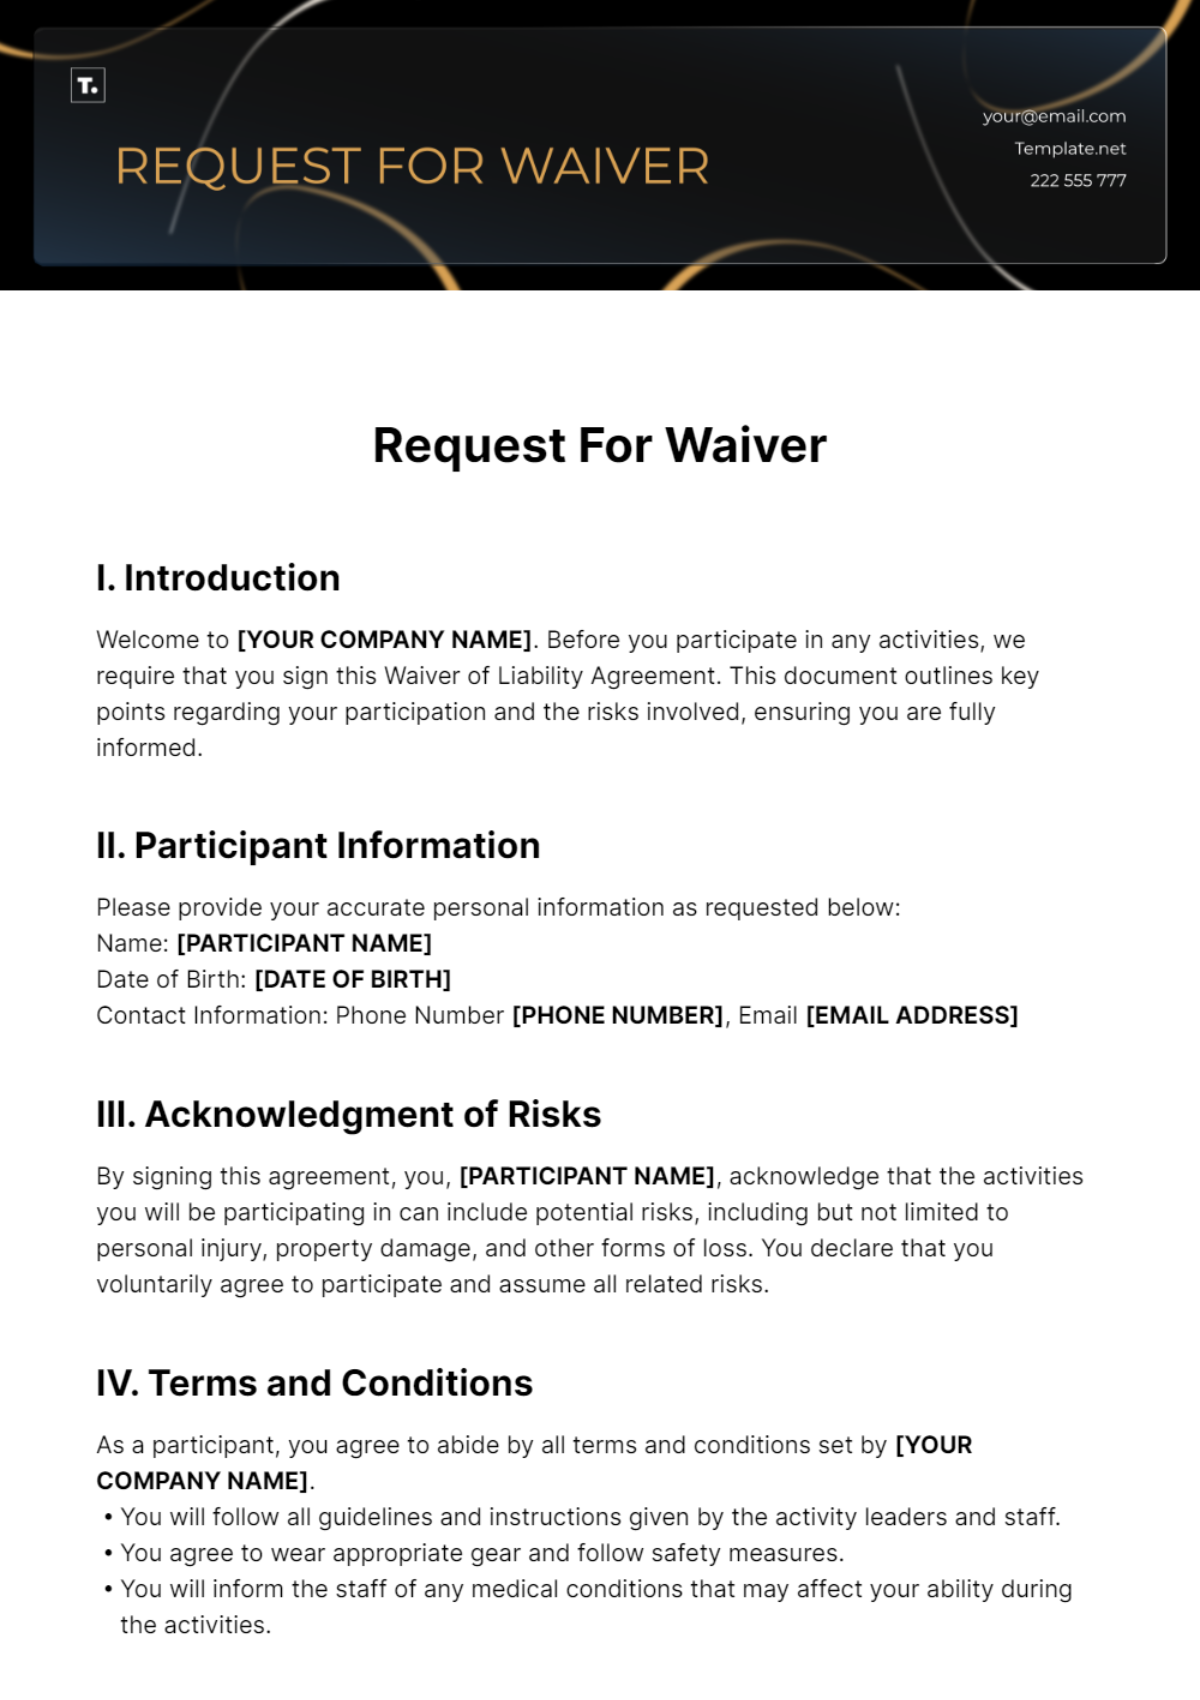 Request For Waiver Template